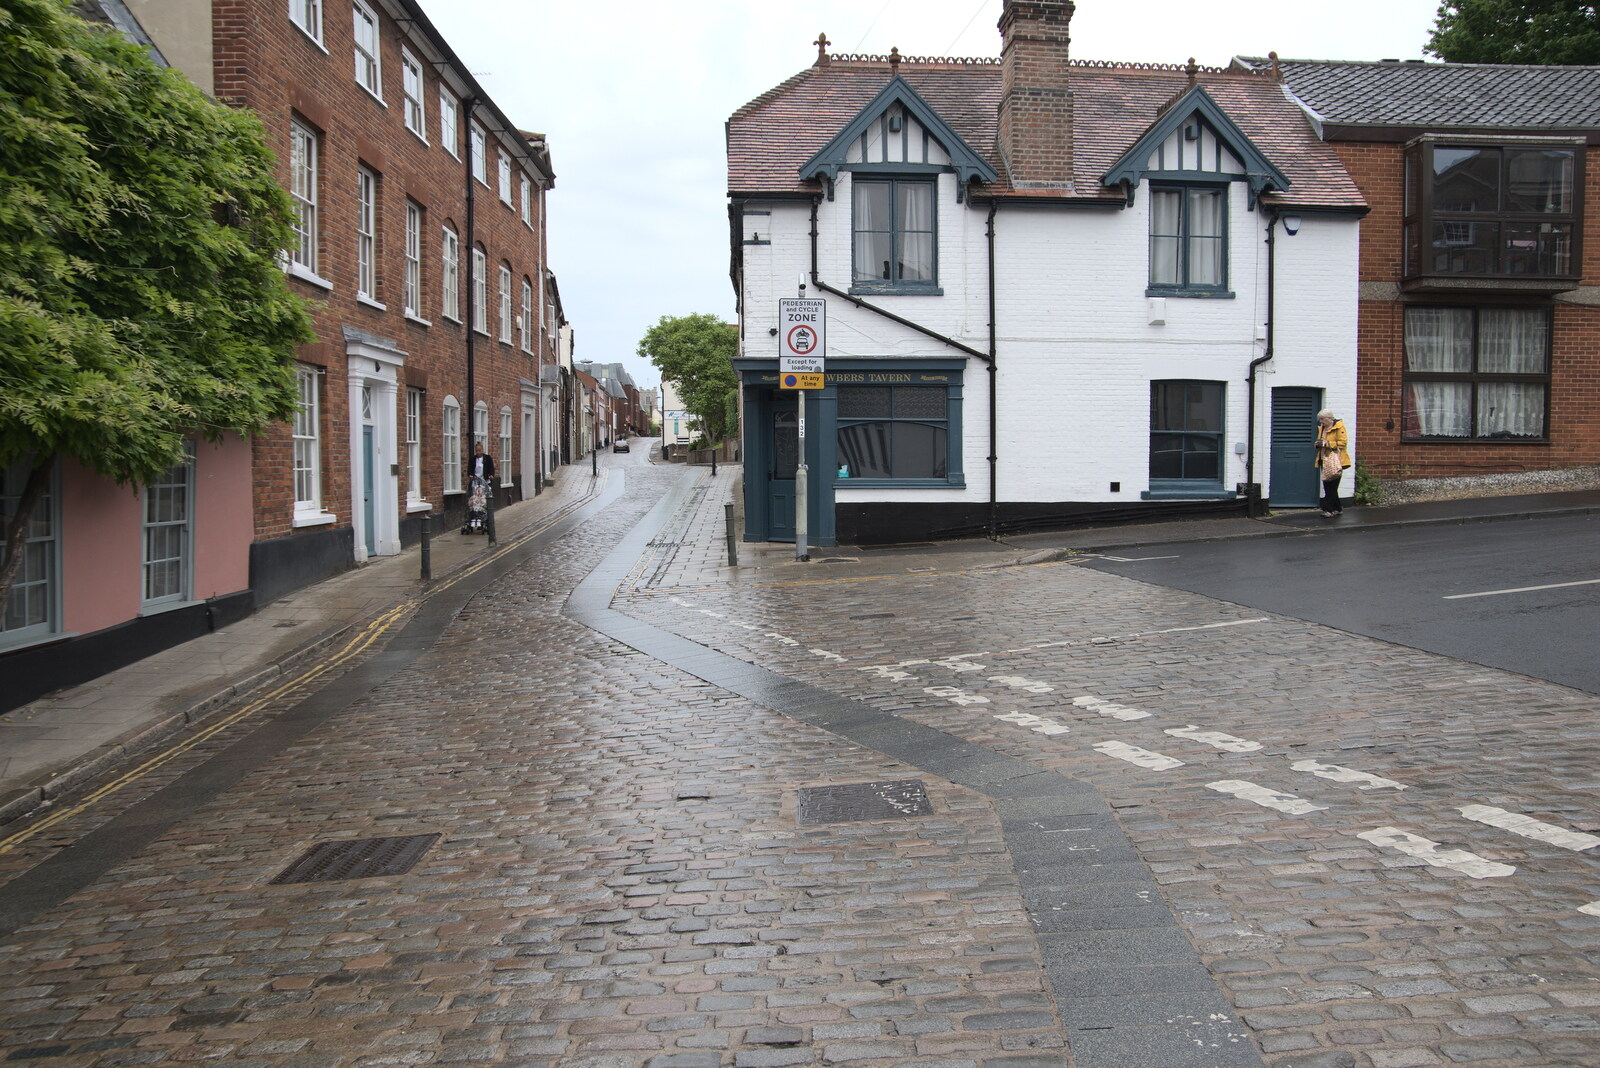 The end of Pottergate from Discovering the Hidden City: Norwich, Norfolk - 23rd May 2022